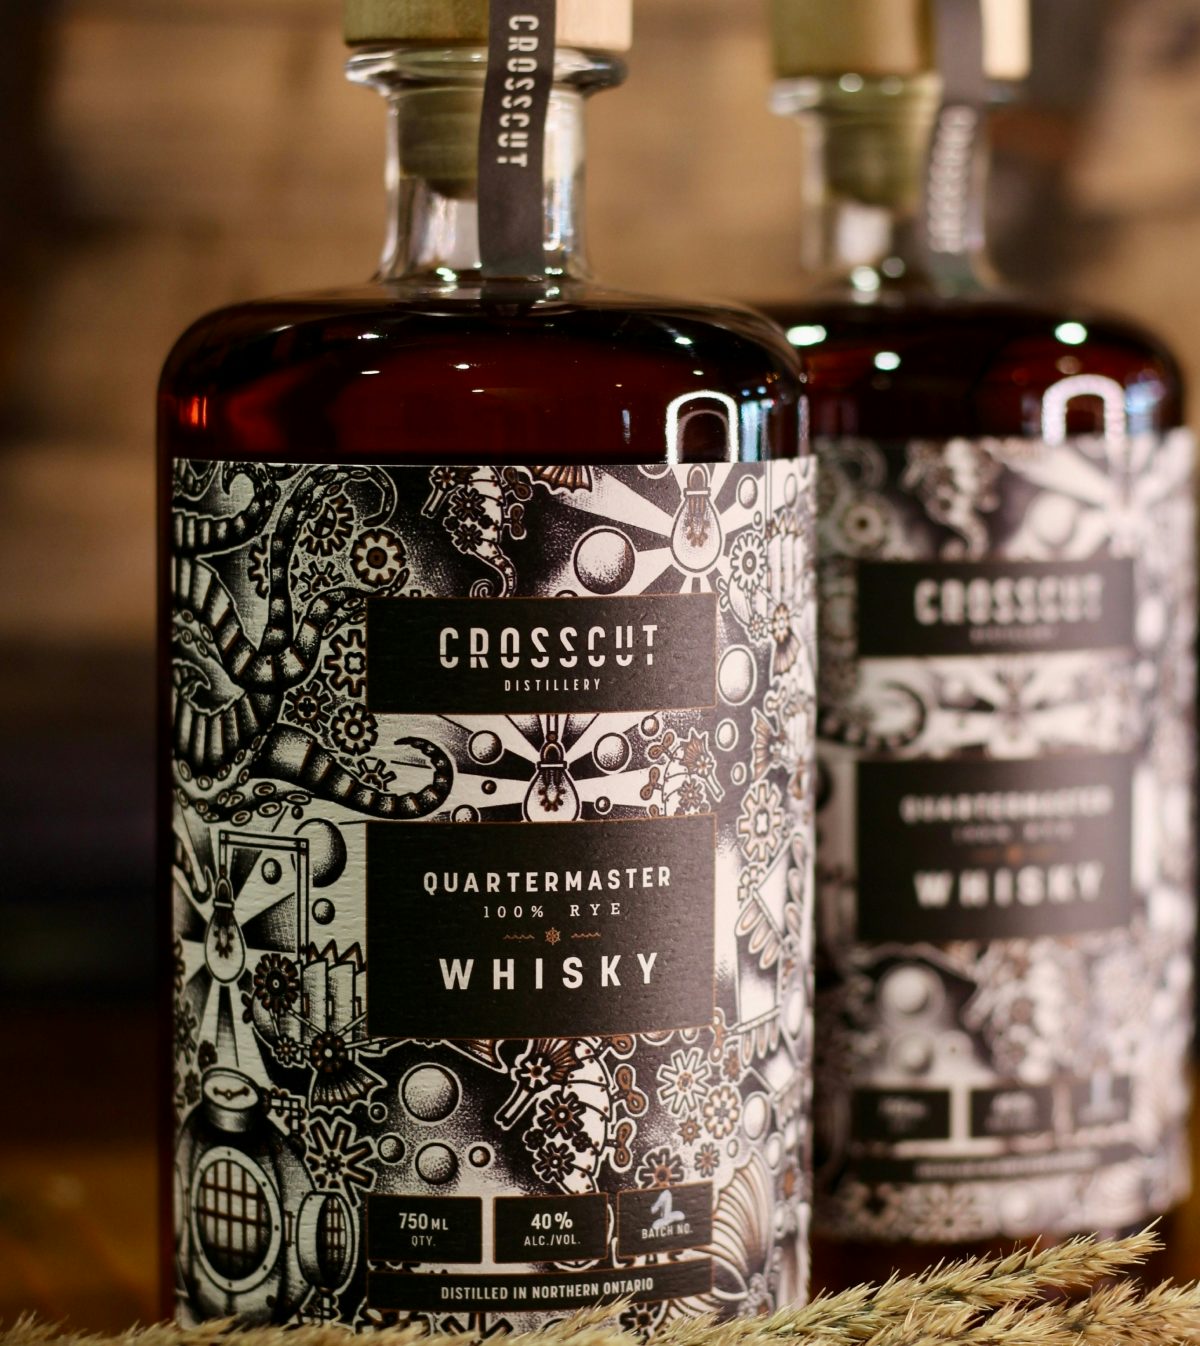 Two Clockwork Four Grain Whisky Gin bottles from Crosscut Distillery displayed on a shelf